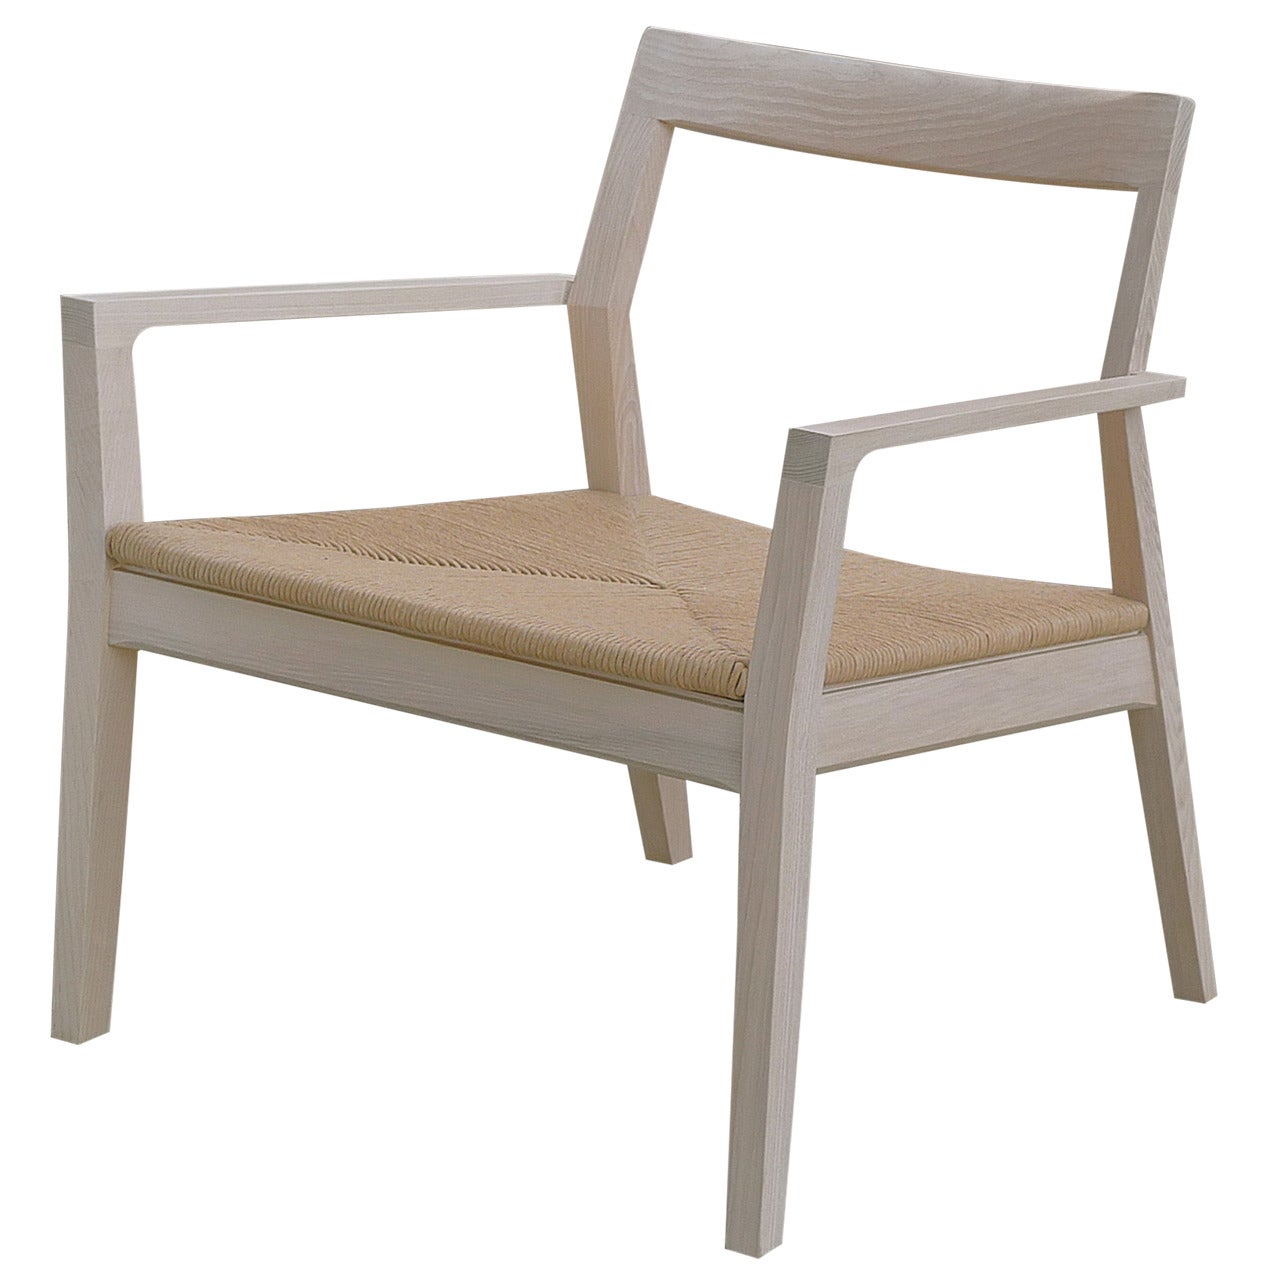 Marc Krusin for Knoll Midcentury-Modern Inspired White Ash and Jute Arm Chair For Sale